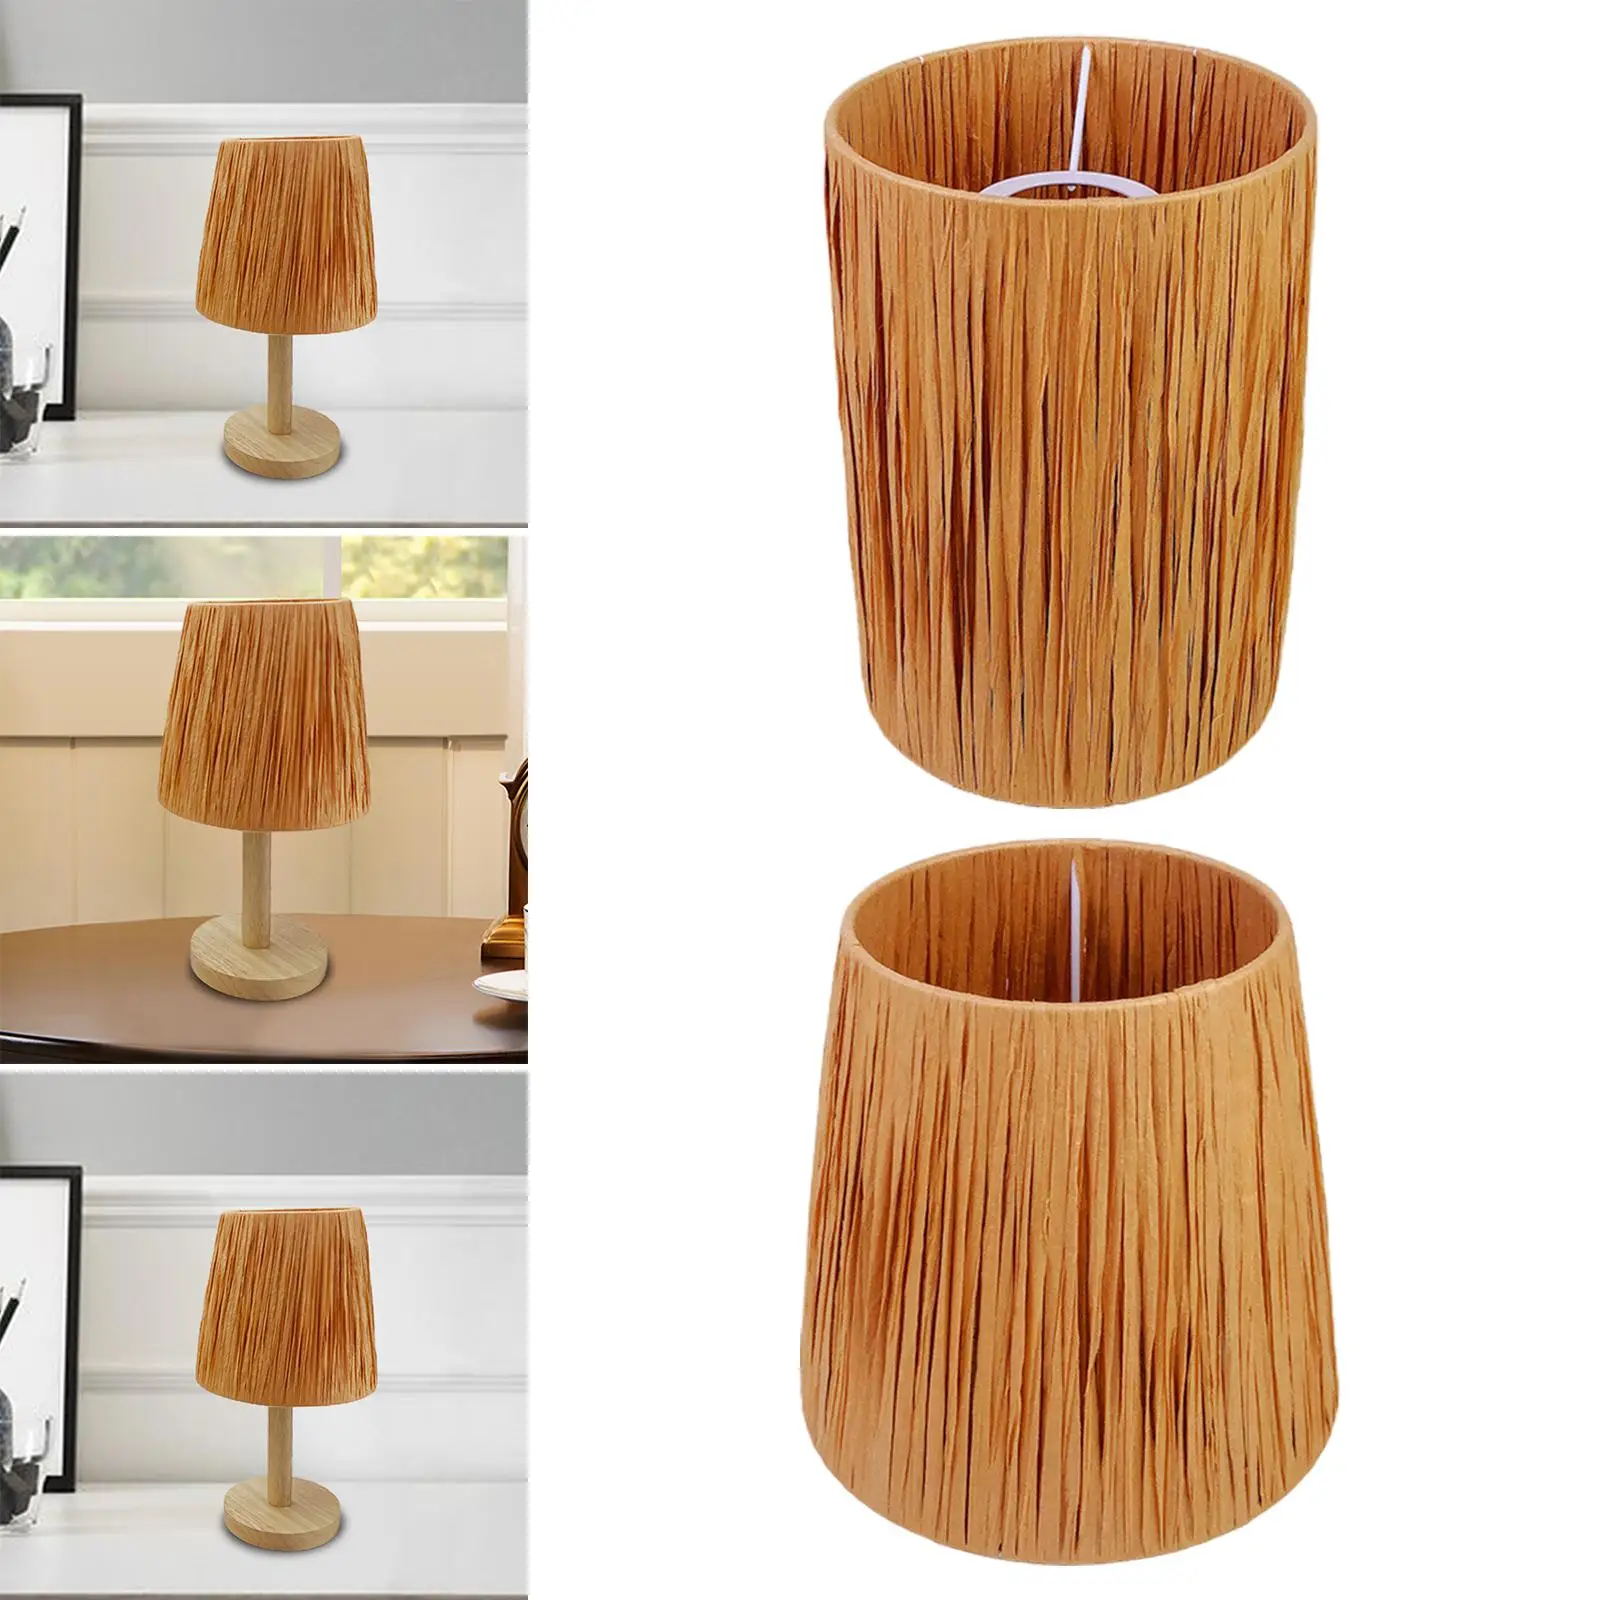 Lamp Shade Easy to Install Fixture Shade Raffia for Desk Hallway NightStand